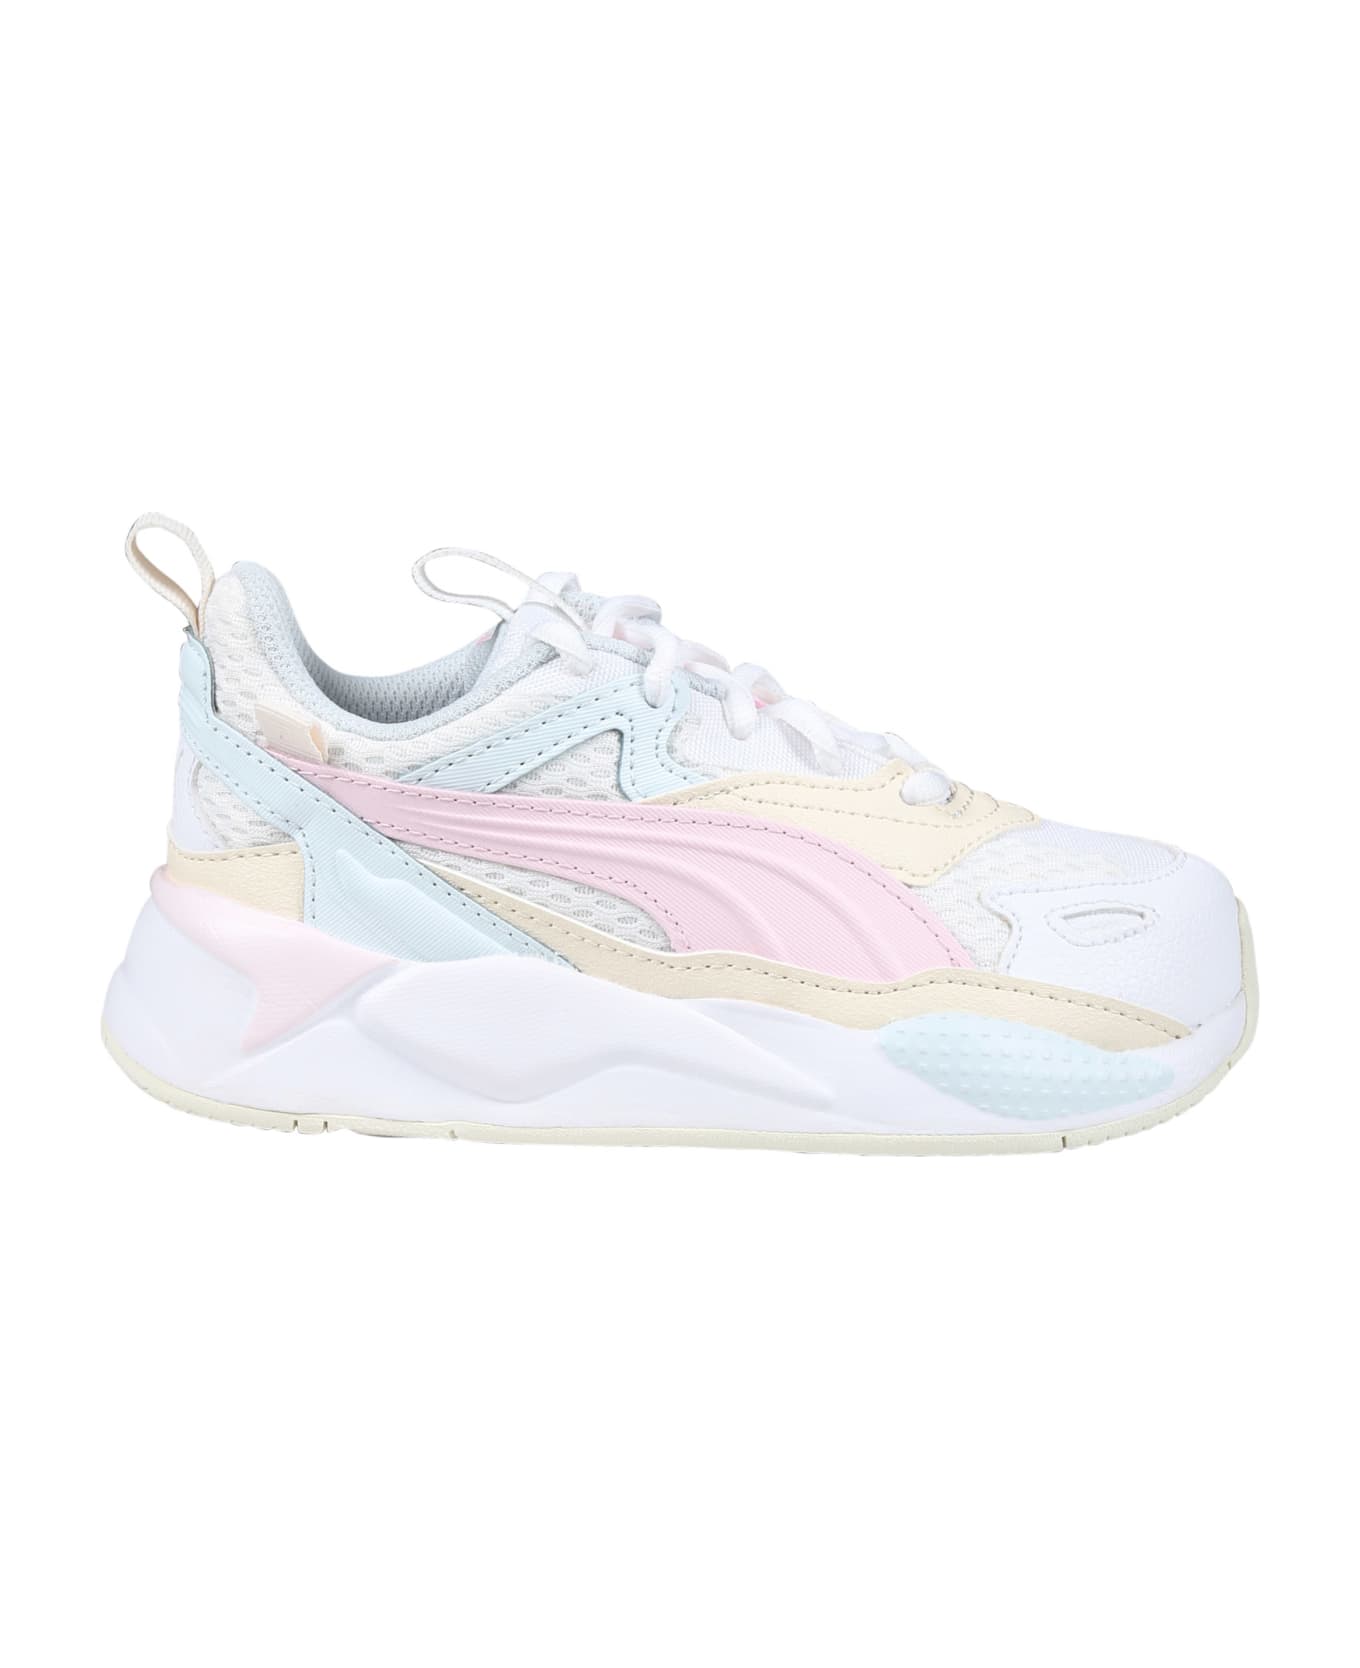 Puma Palermo Lth White Low Sneakers For Girl - White シューズ